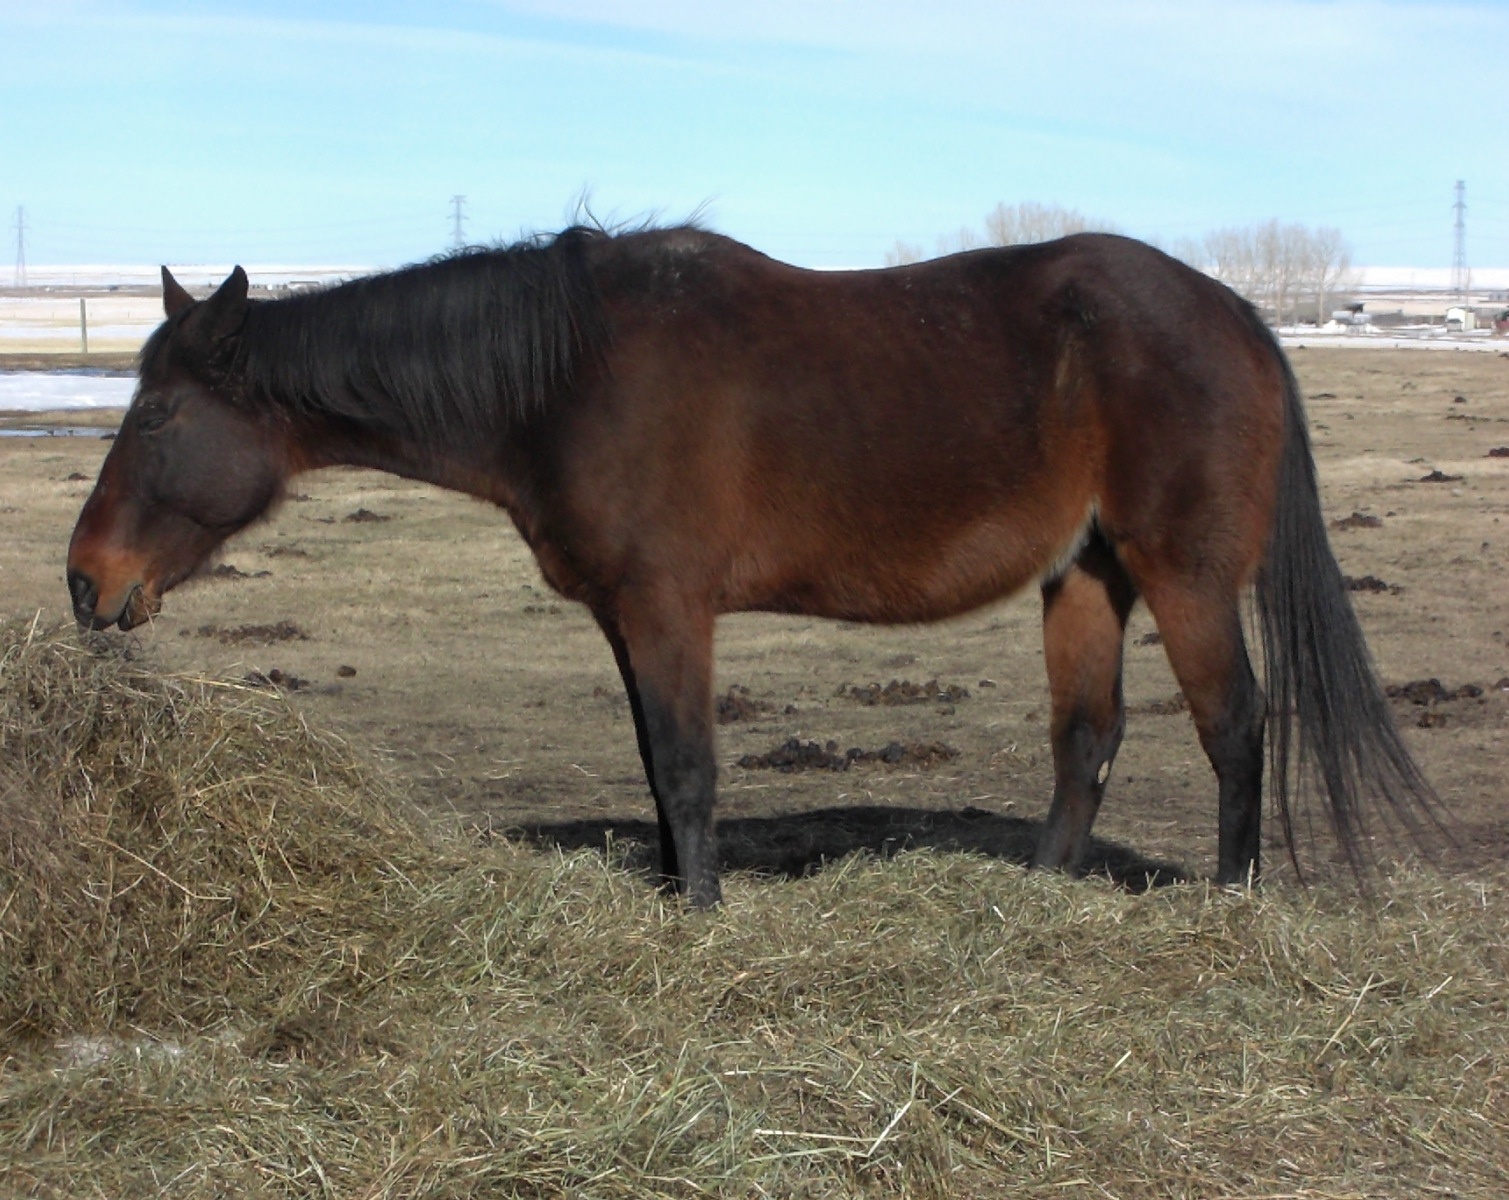 ANNIE - April 2016. Annie was raced and then used as a broodmare for years. It took a toll on her body, and at 19 yrs old, her body started shutting down. Her owner made the hard decision to have her put to sleep.